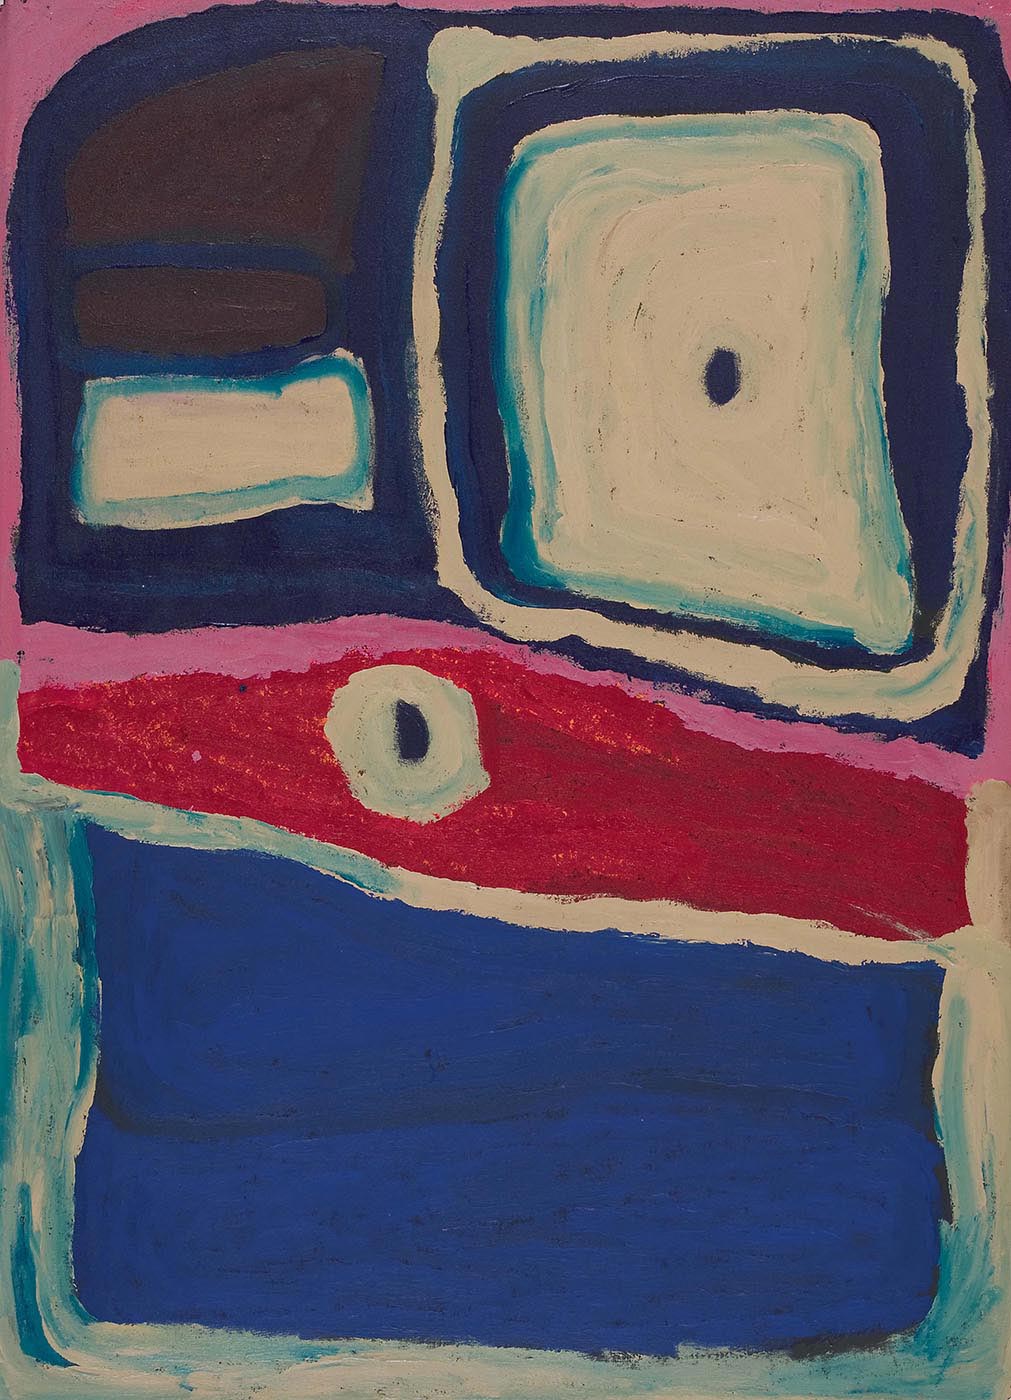 A multi-coloured acrylic painting on canvas with a beige and blue concentric rectangular shape in the top right corner with a small blue disc in the centre. At the top left are two dark blue and off white shapes in a vertical row. All of these are bordered with pink. Beneath that is a horizontal section in red with a disc of beige and black. The lower section of the canvas is filled with dark blue and bordered with a beige-blue colour - click to view larger image